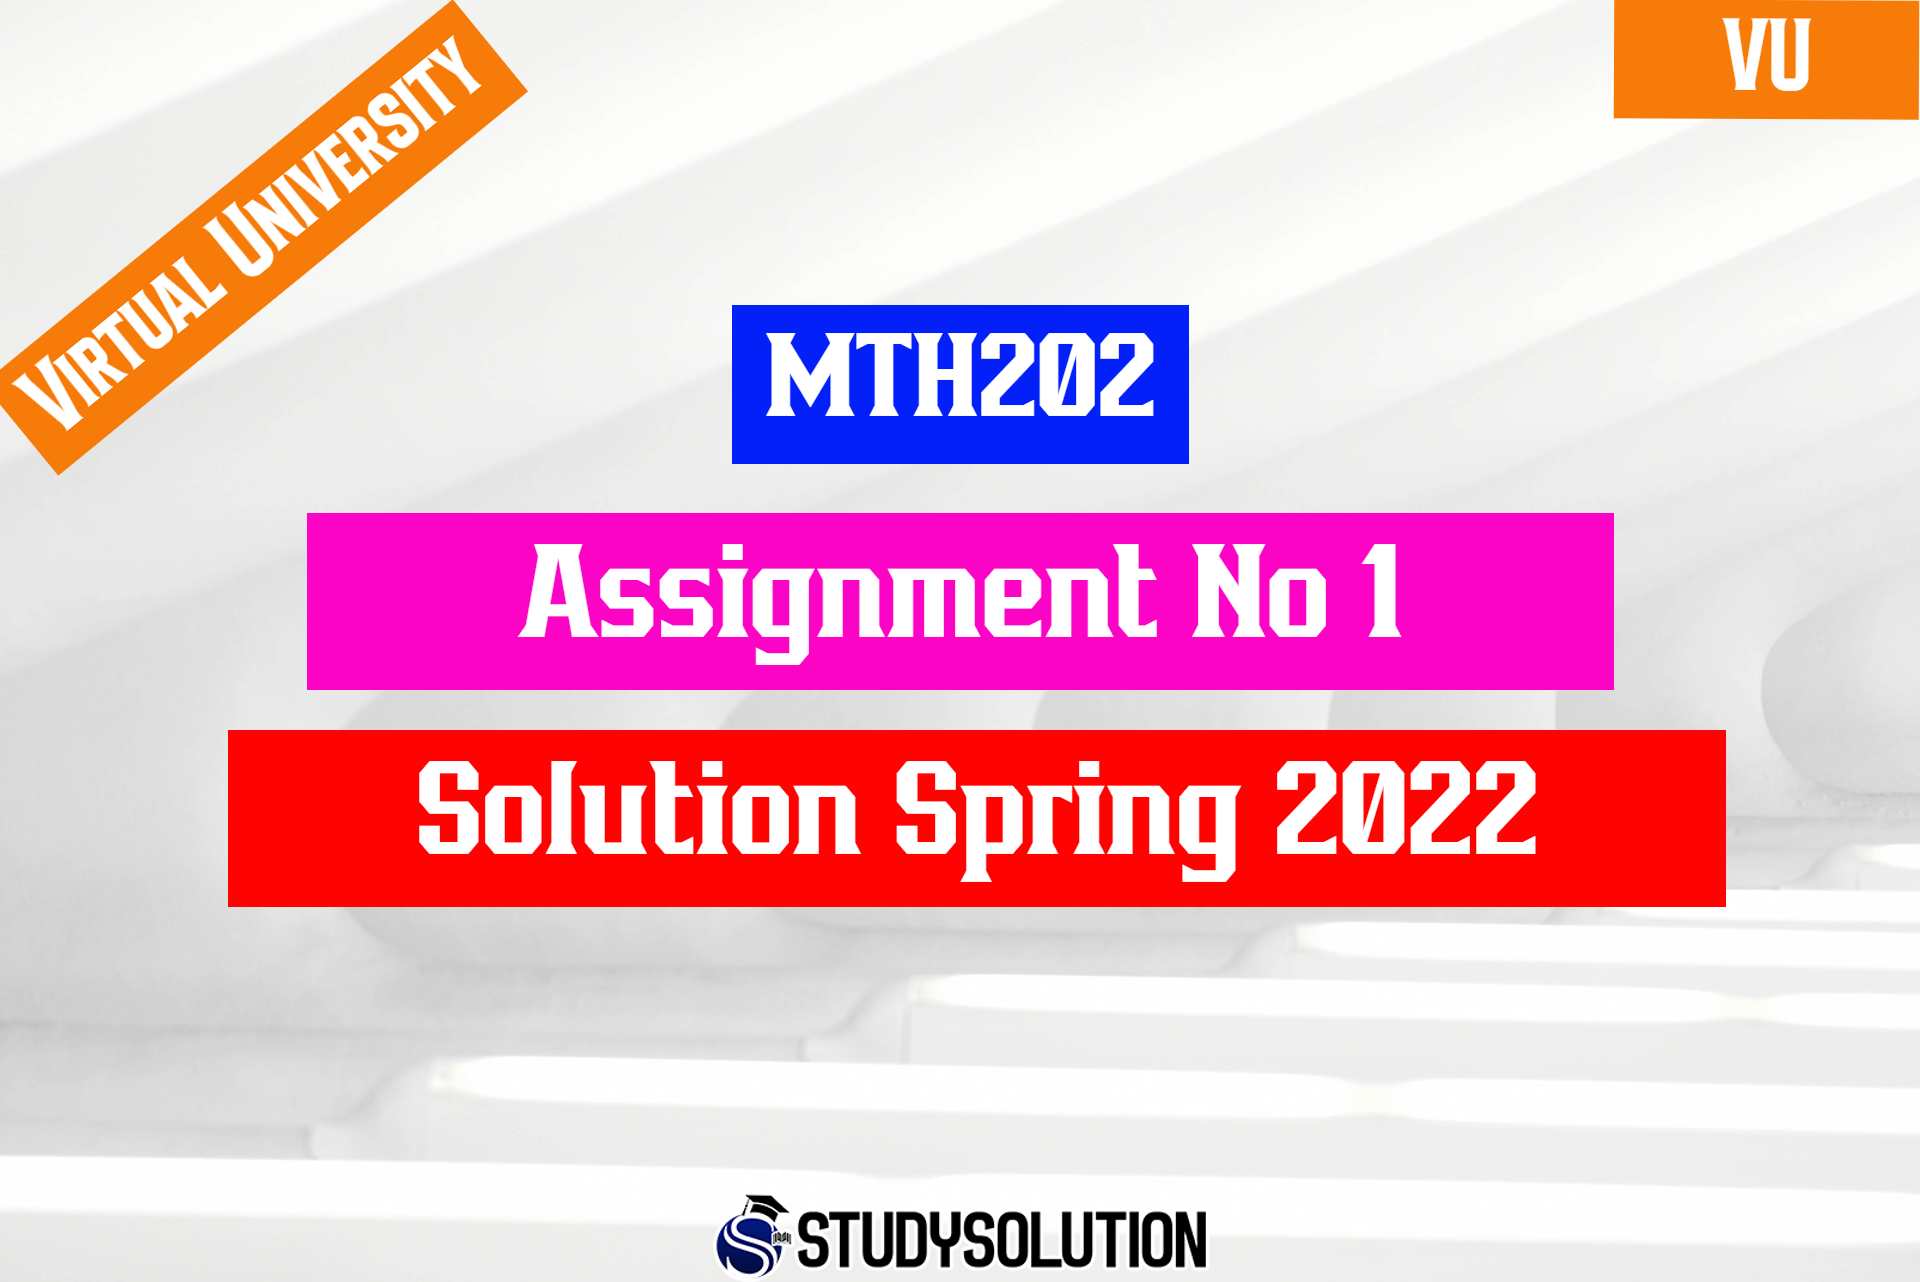 MTH202 Assignment No 1 Solution Spring 2022